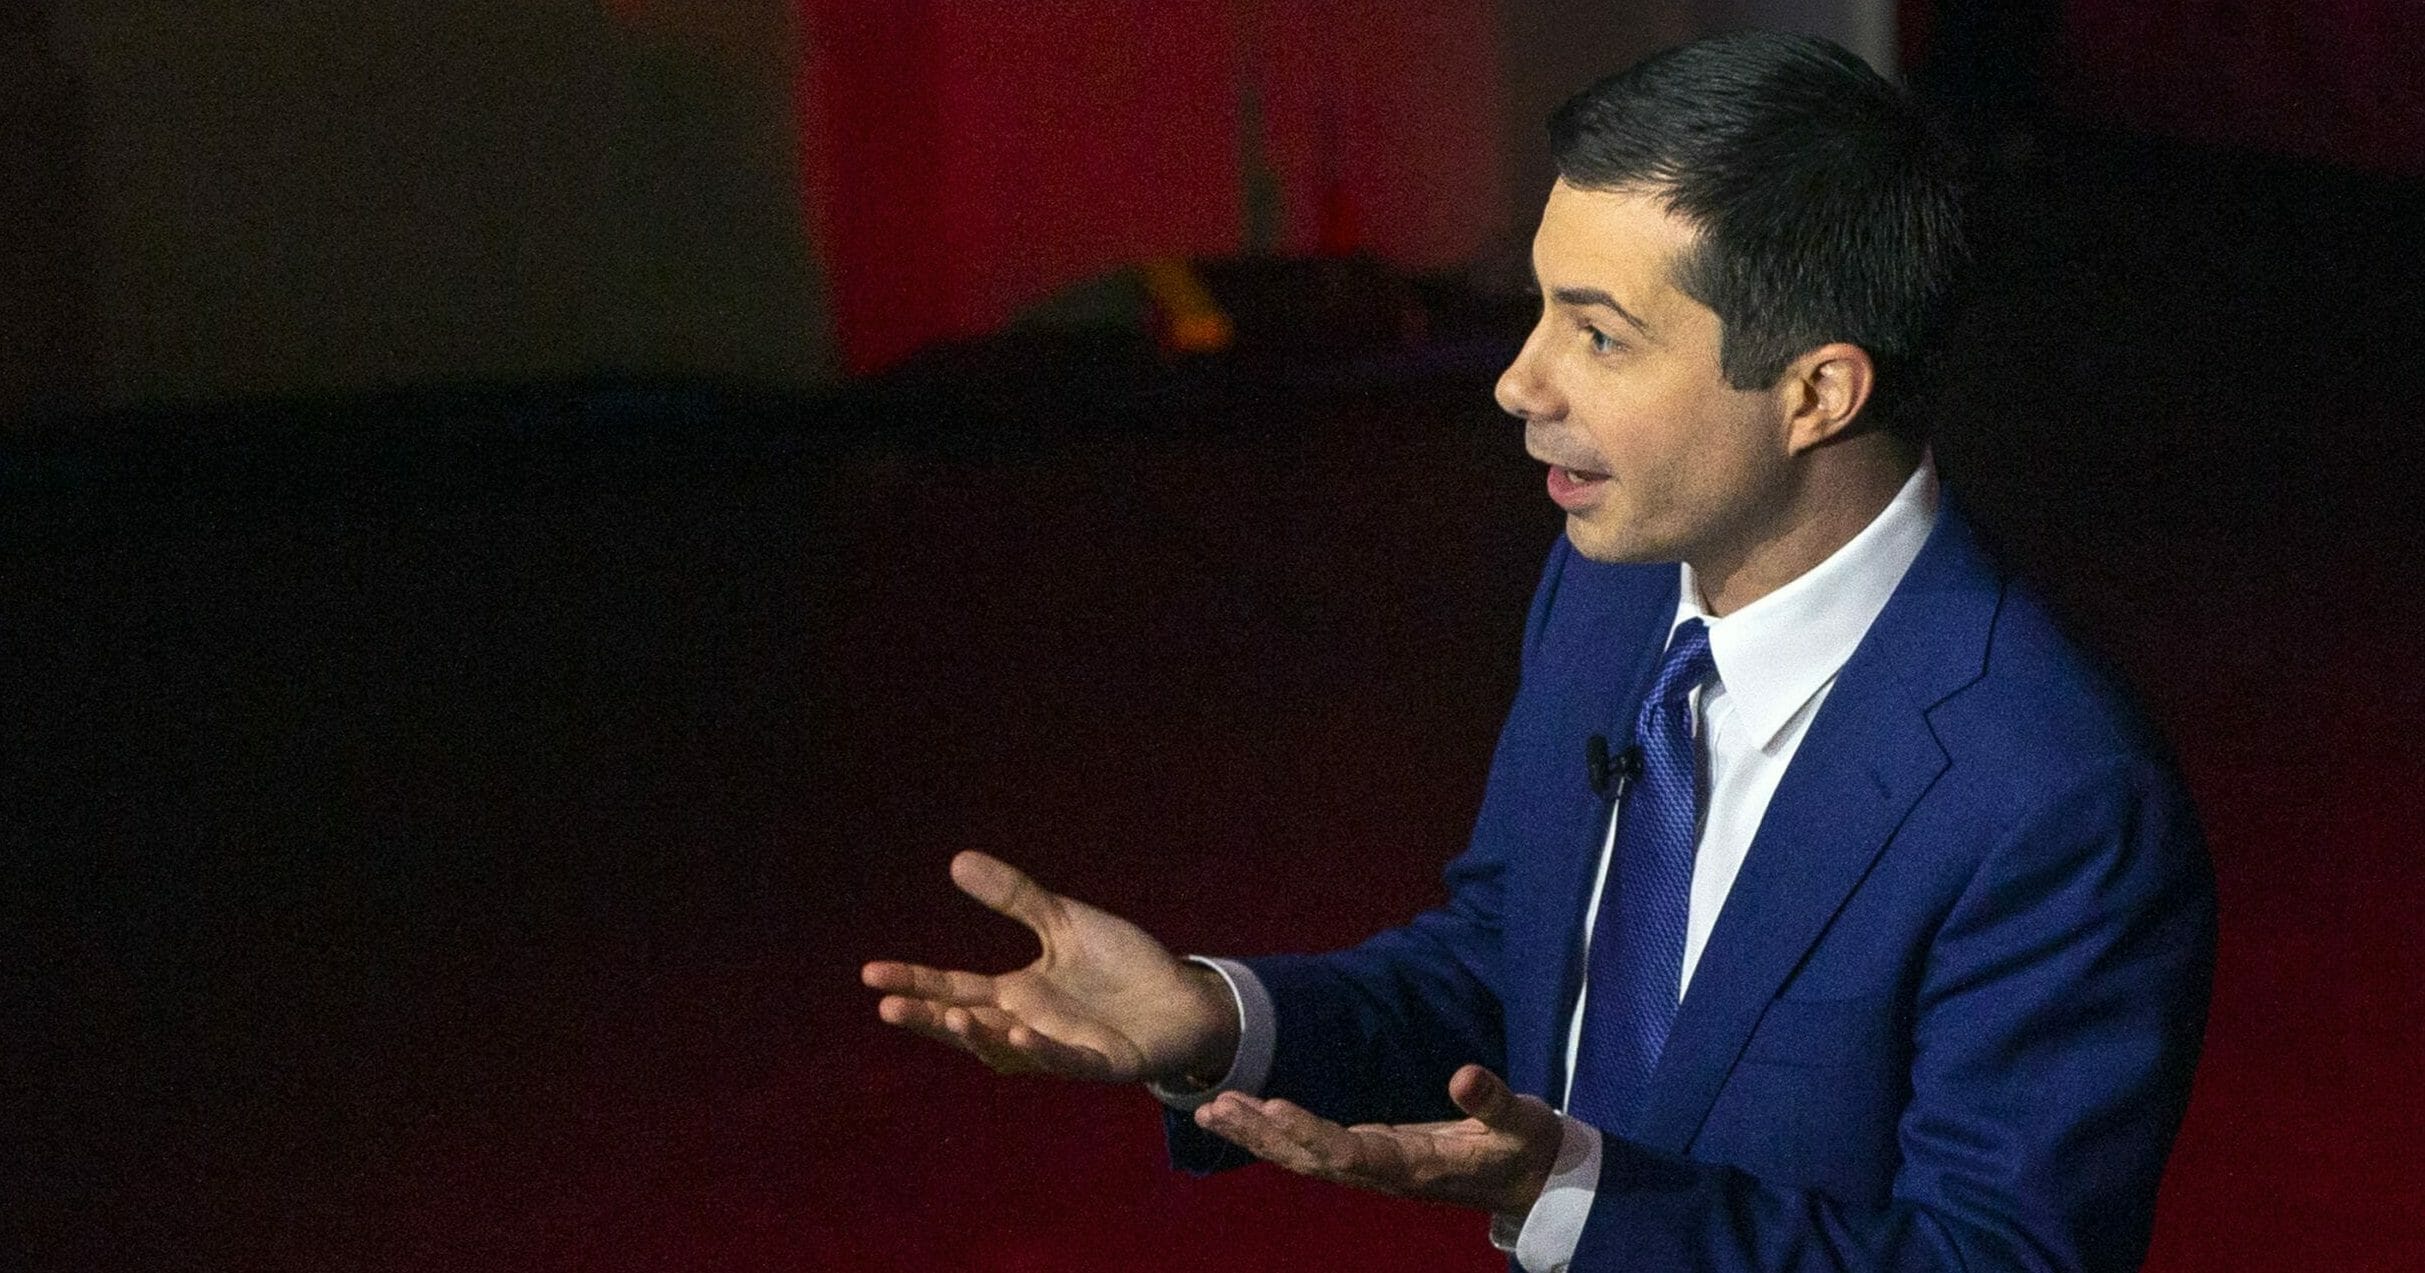 Democratic presidential candidate and former South Bend, Indiana, Mayor Pete Buttigieg takes questions from students at the USC Dornsife Center for the Political Future town hall in Los Angeles on Feb. 20, 2020.